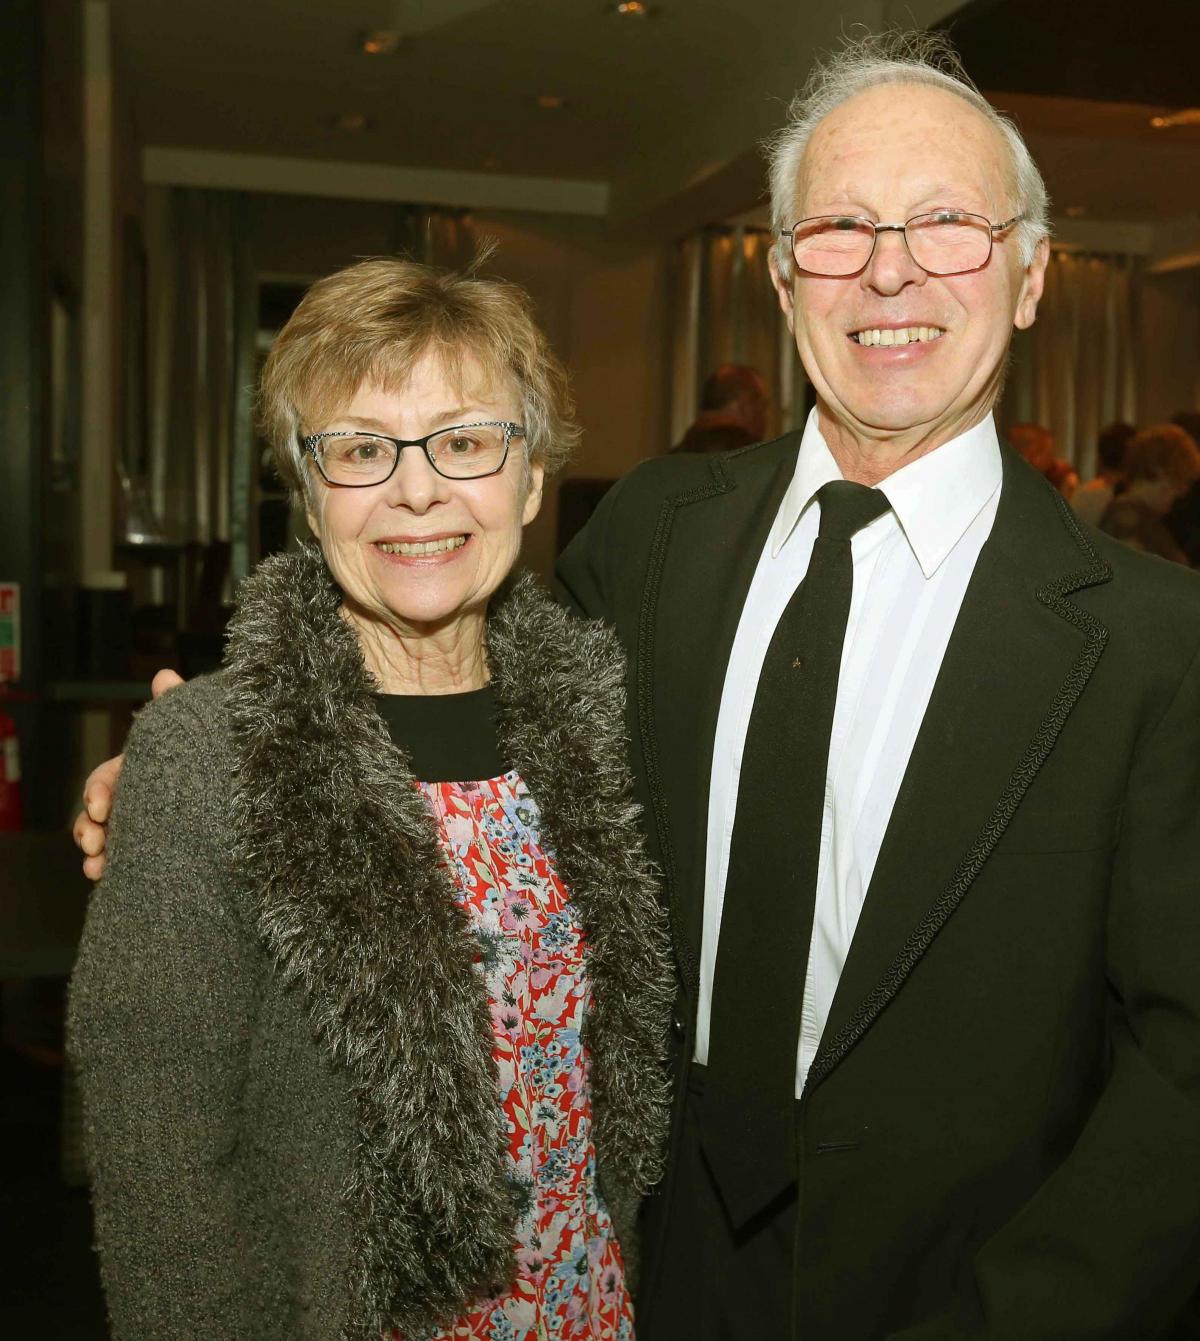 The Masonic Ladies Night at Scotch Corner Hotel.
Janet Woolf and Malcolm Woodman.
Picture: Richard Doughty Photography